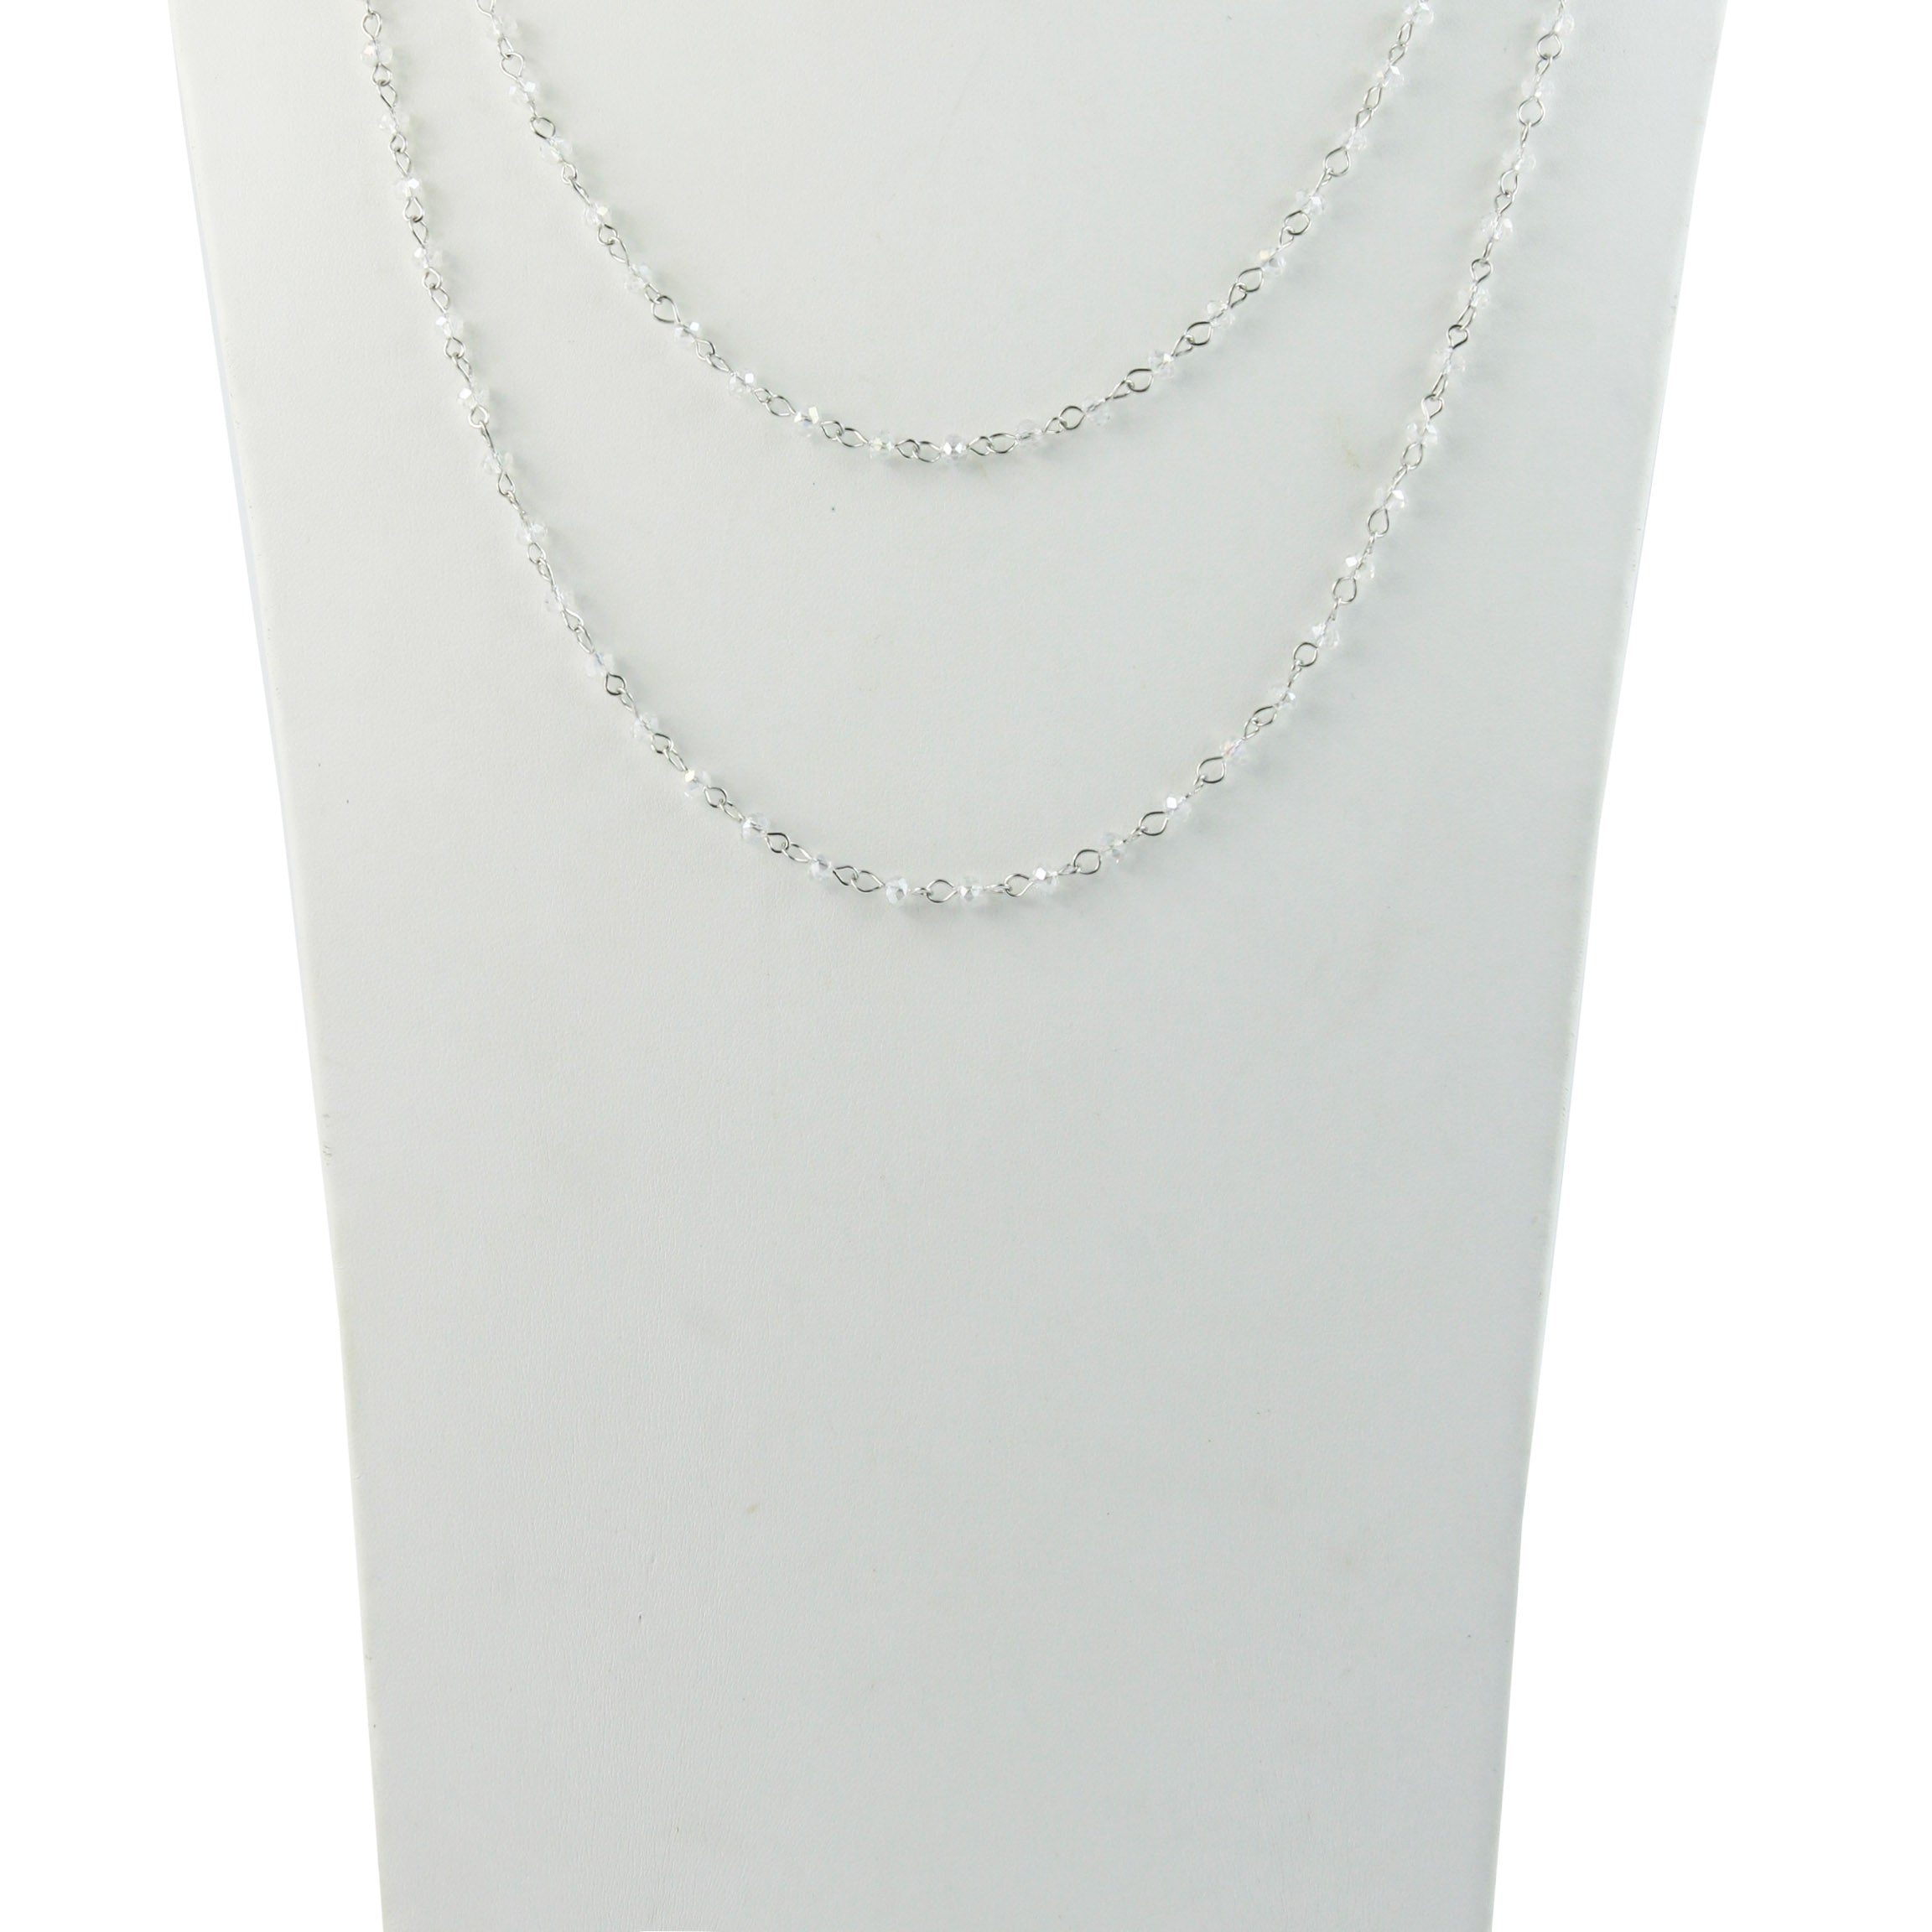 Crystal Beads Chain Necklace N1163-35